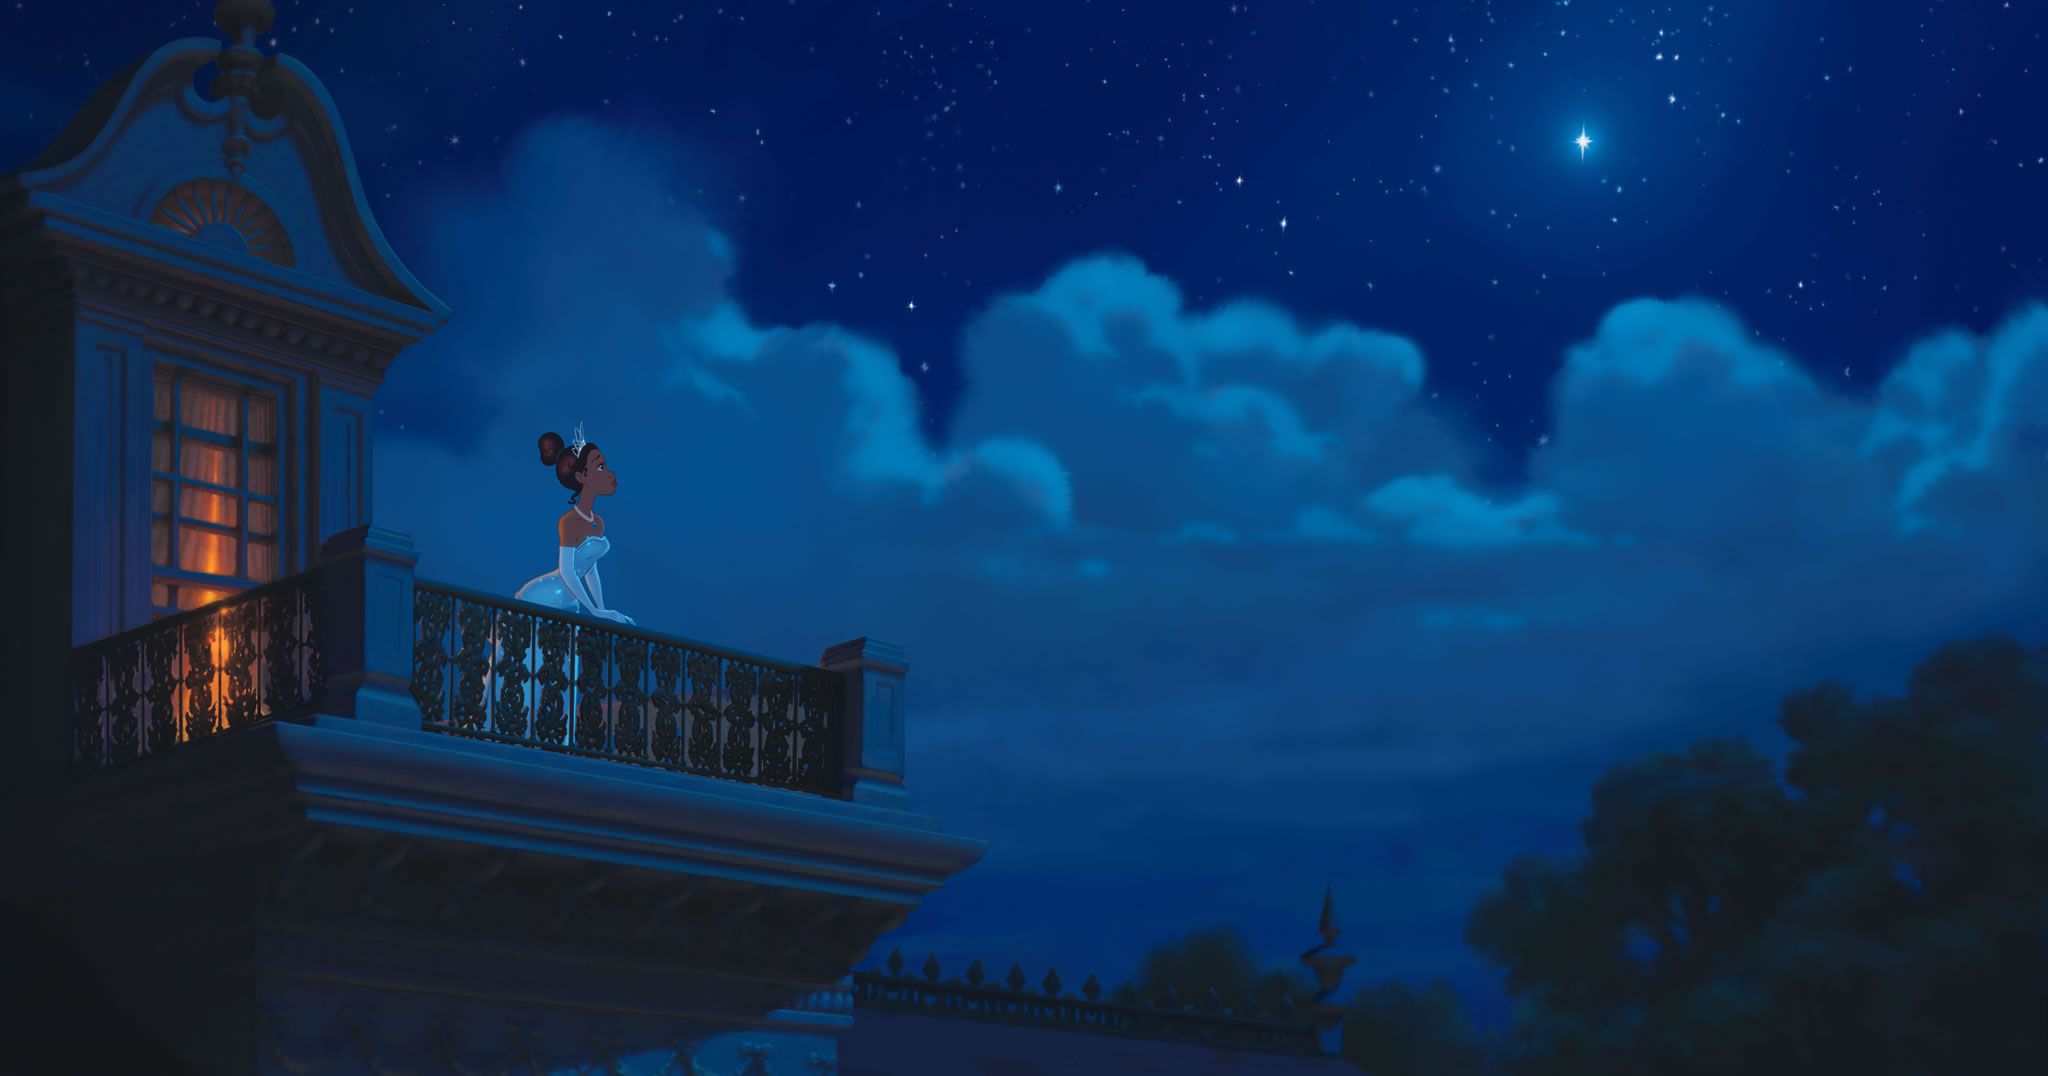 Free download Tiana from Disneys Princess and the Frog wallpaper Click picture [2048x1076] for your Desktop, Mobile & Tablet. Explore Princess Tiana Wallpaper. Princess and the Frog Wallpaper